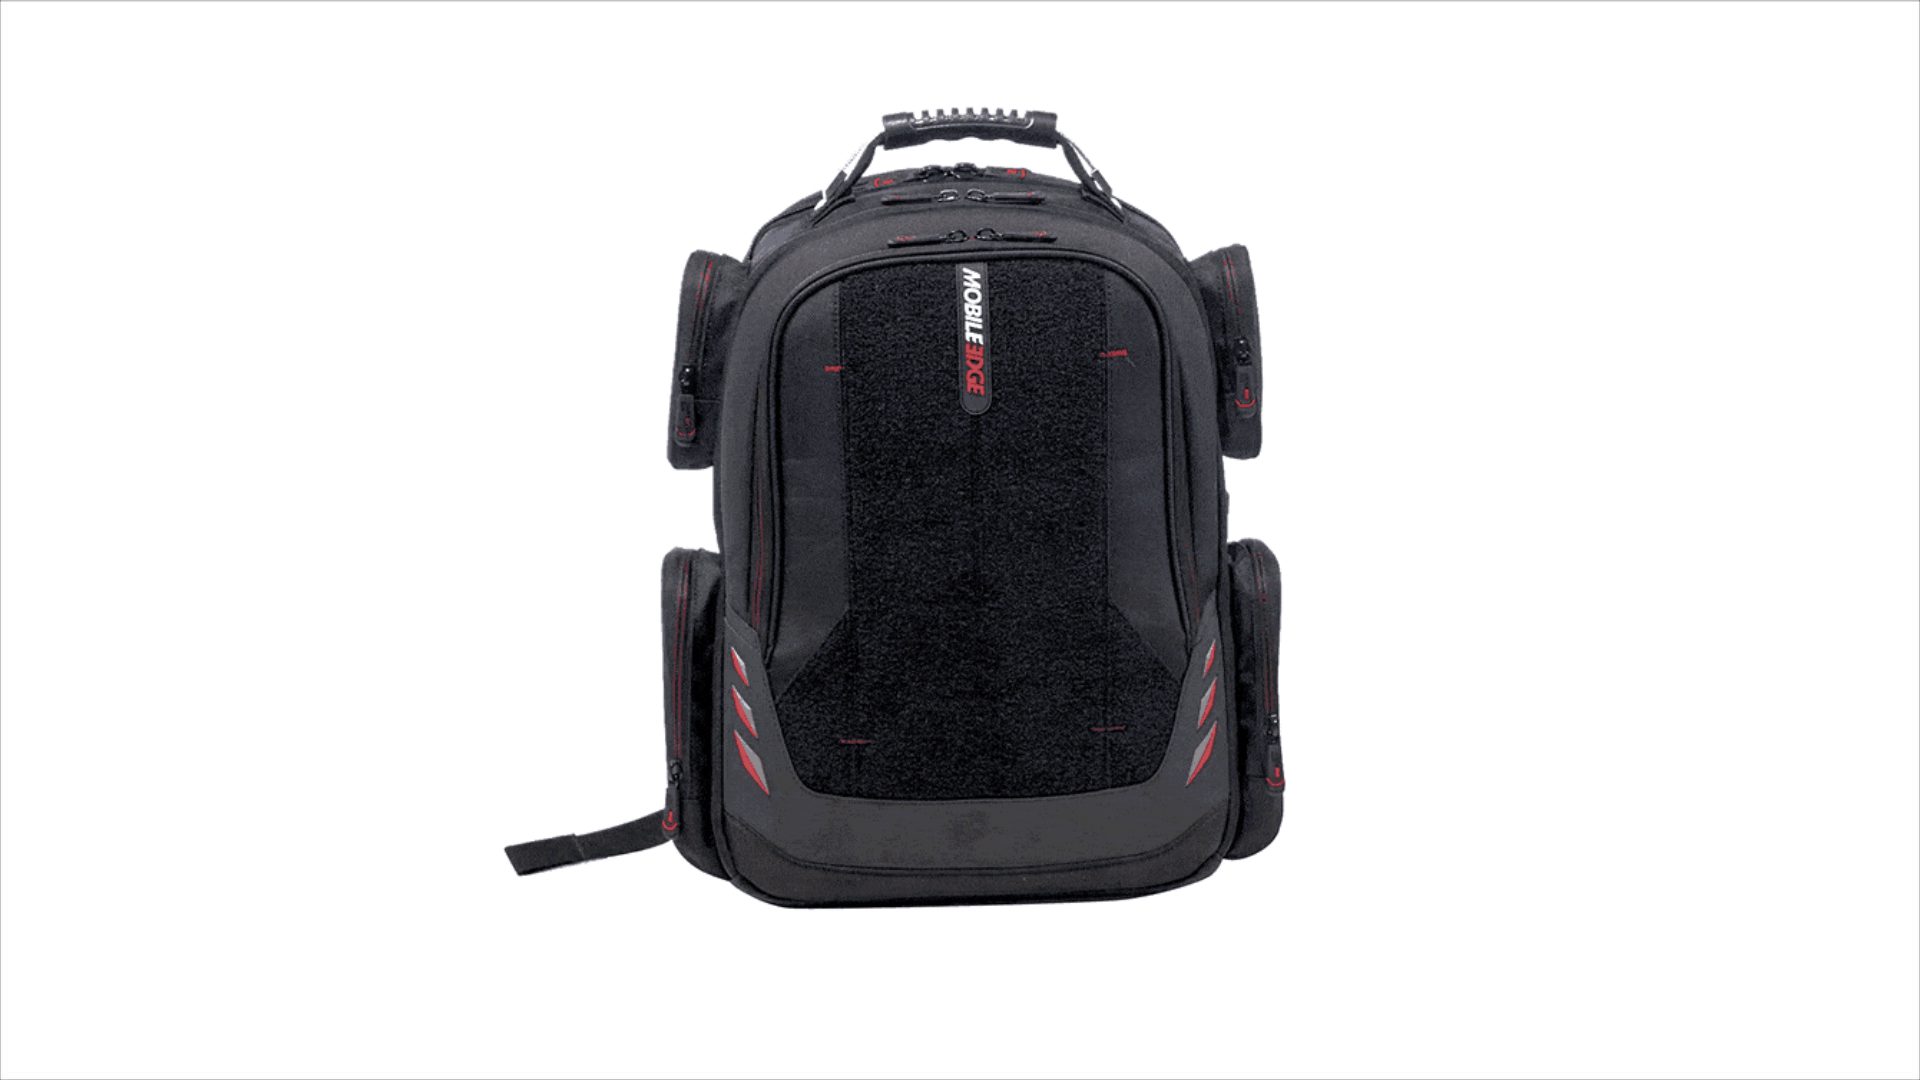 Mobile Edge announces CORE Gaming Backpack